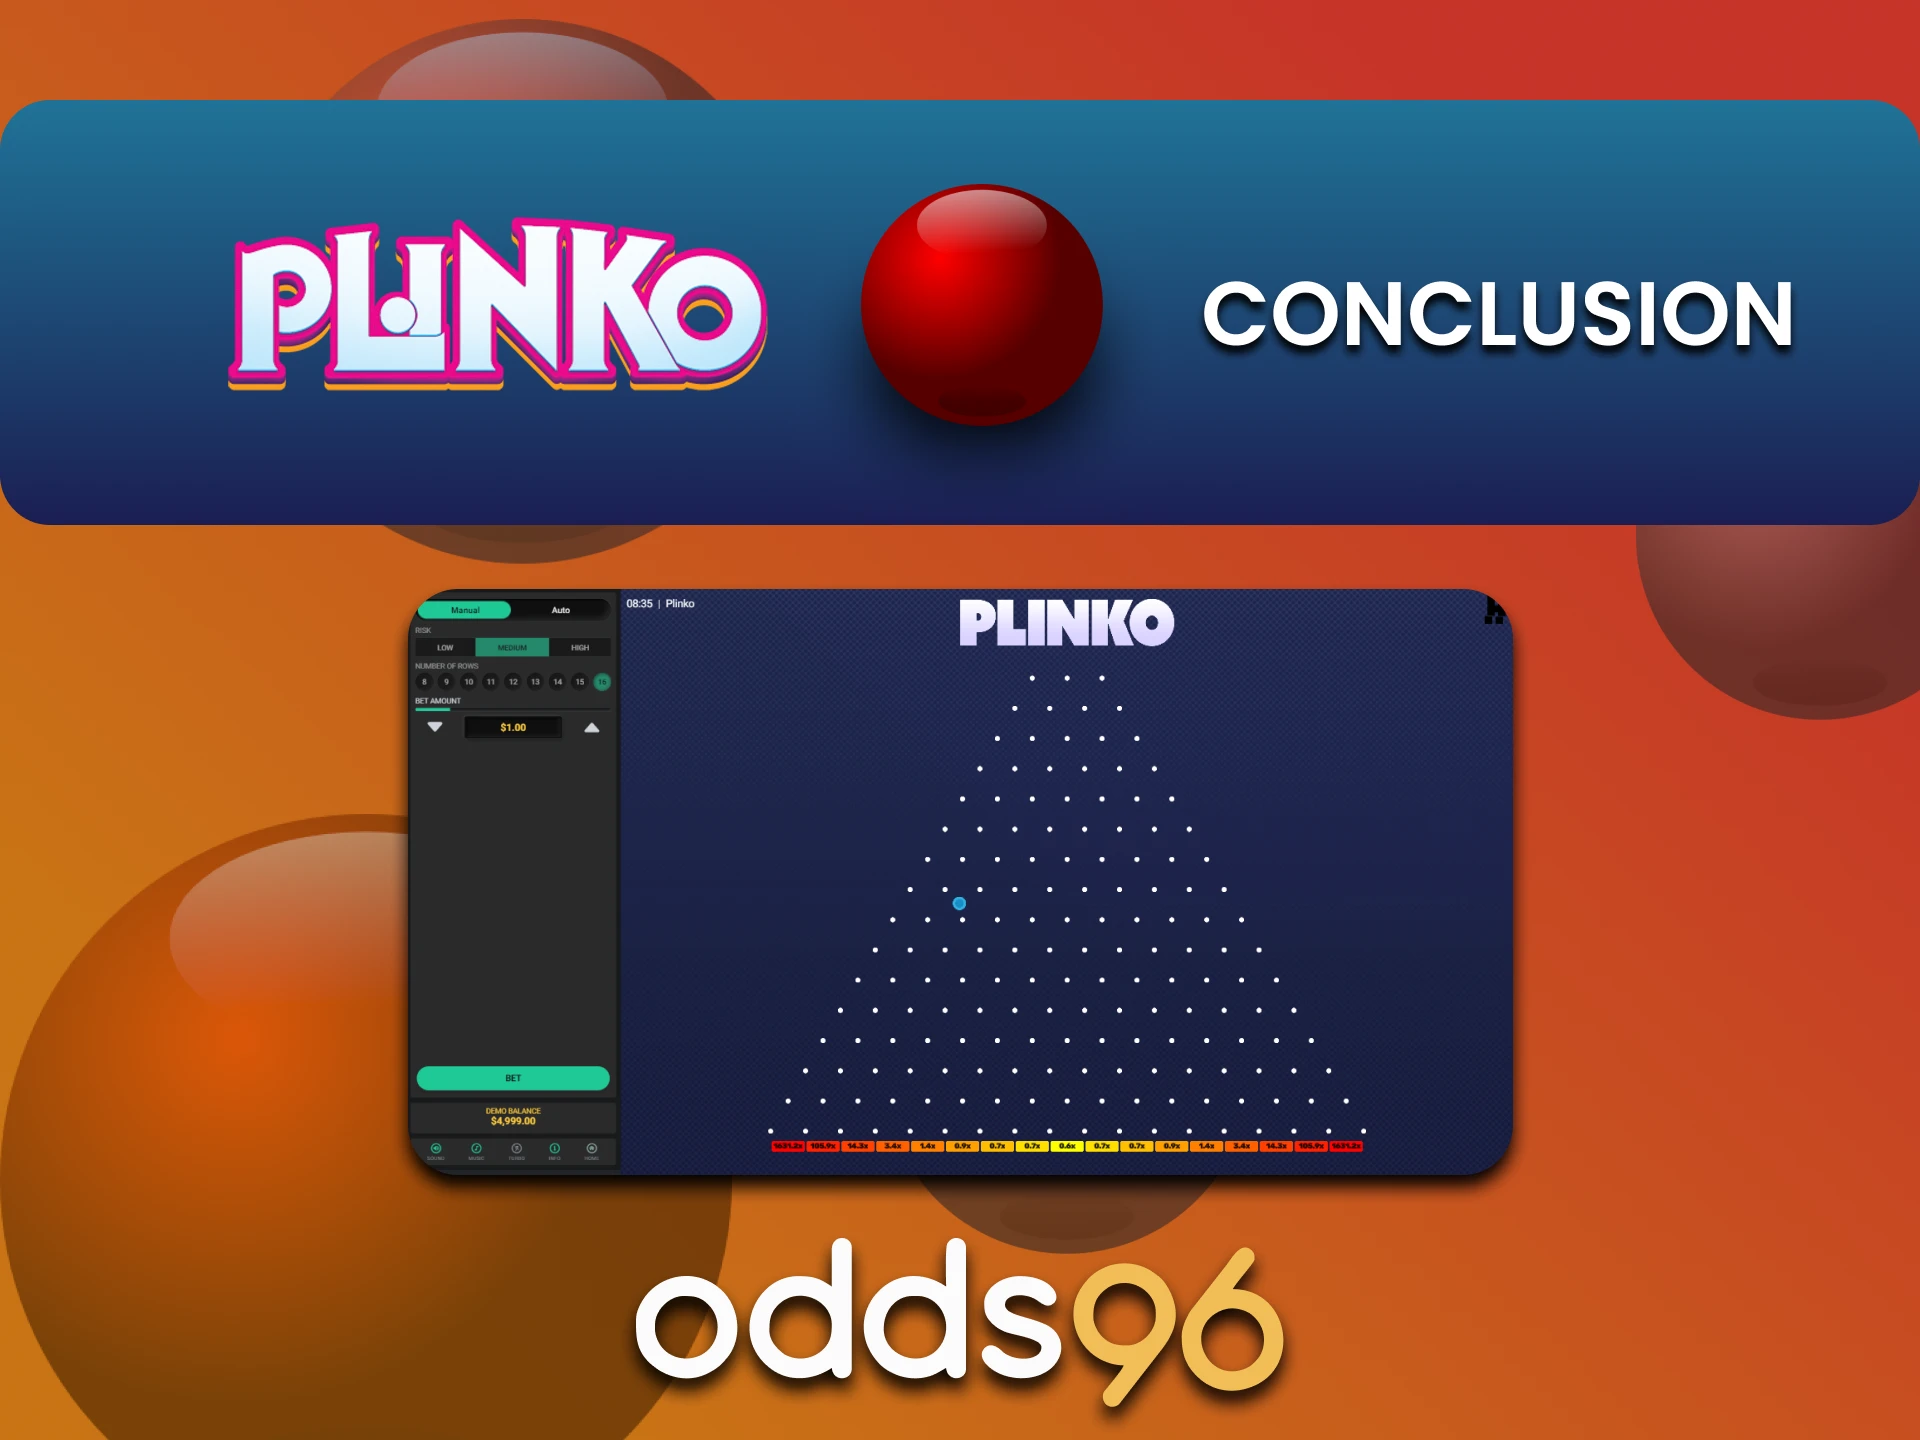 Odds96 is the right choice for playing Plinko.